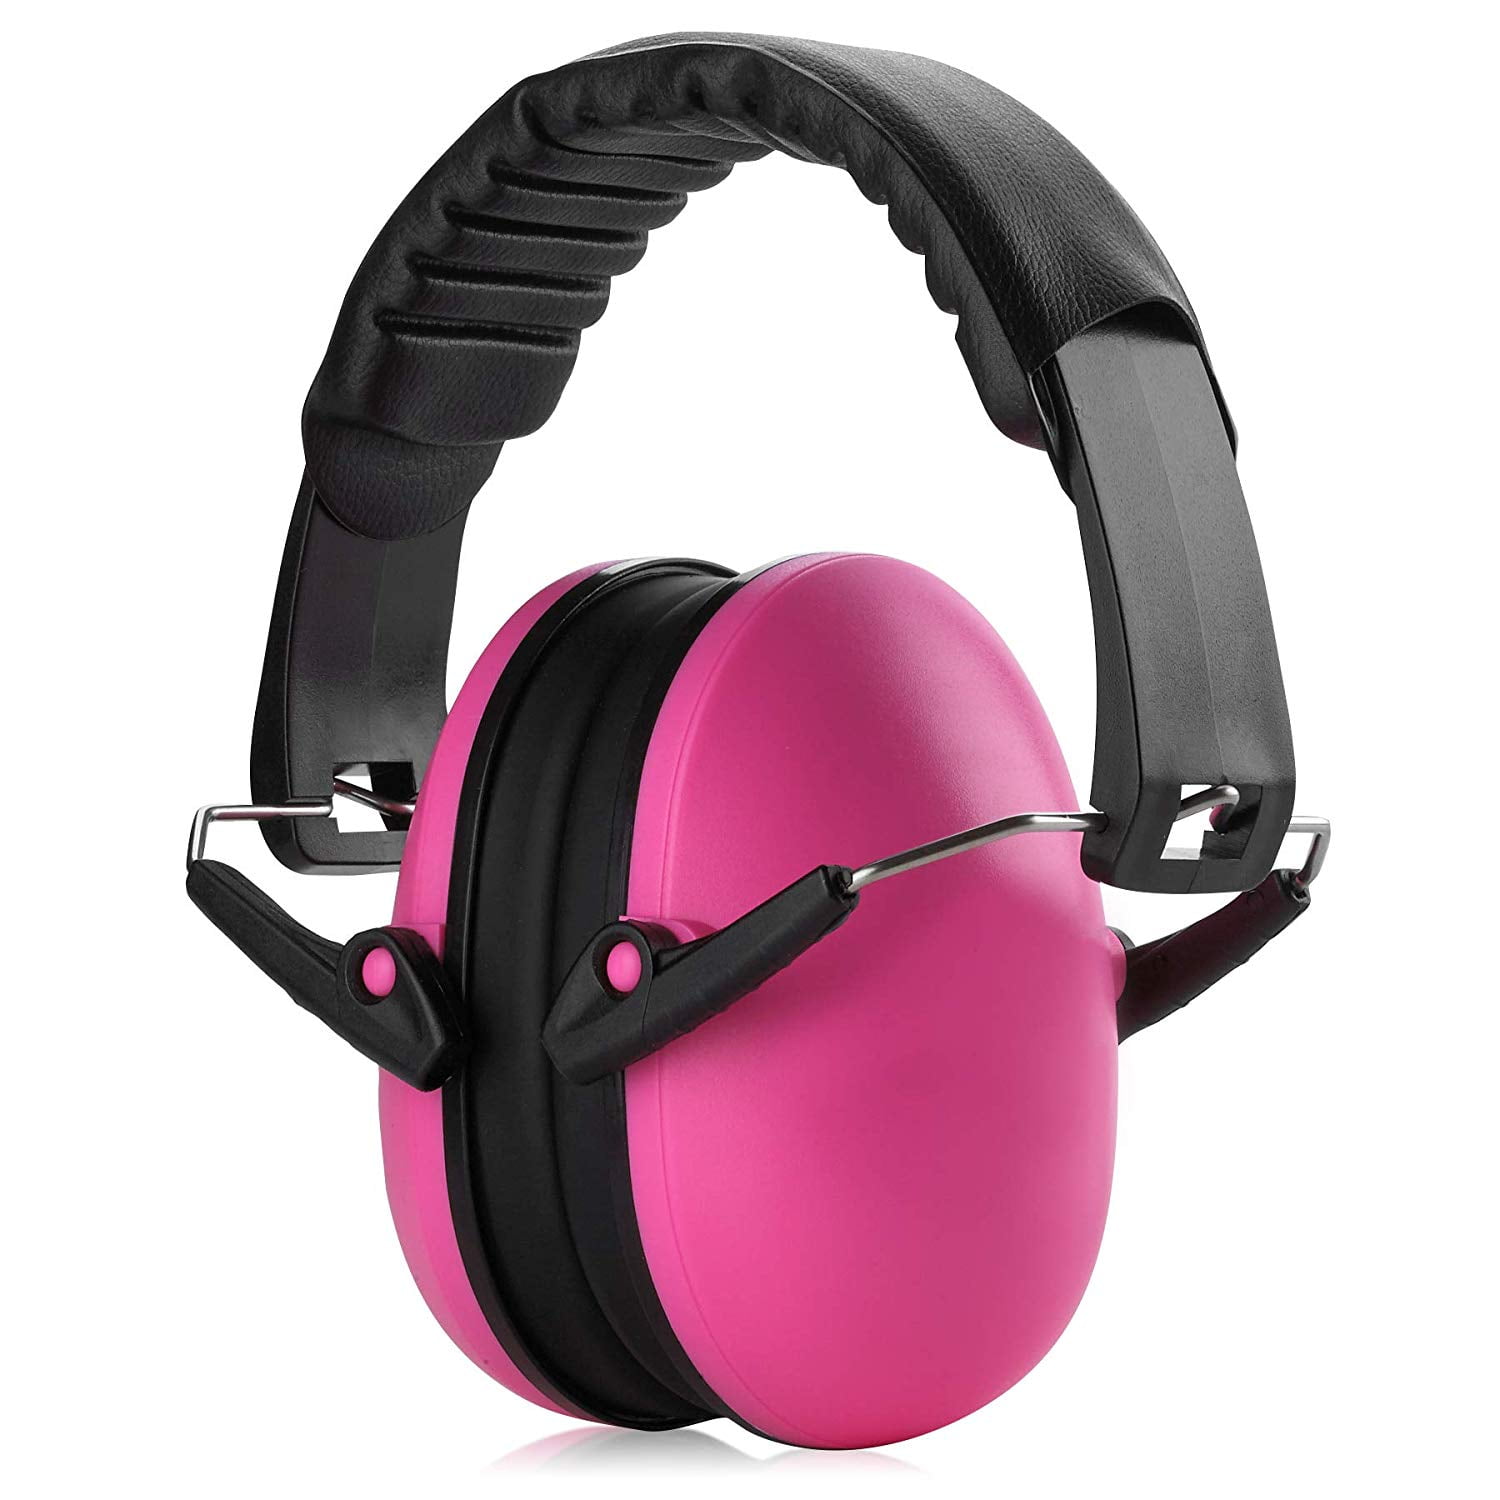 Soundox Noise Canceling Earplugs for Sleep Study Rose Pink Travel and Concerts Noise Reducing Comfortable Ear Protection for Noise Canceling Ears Aerospace Aluminum